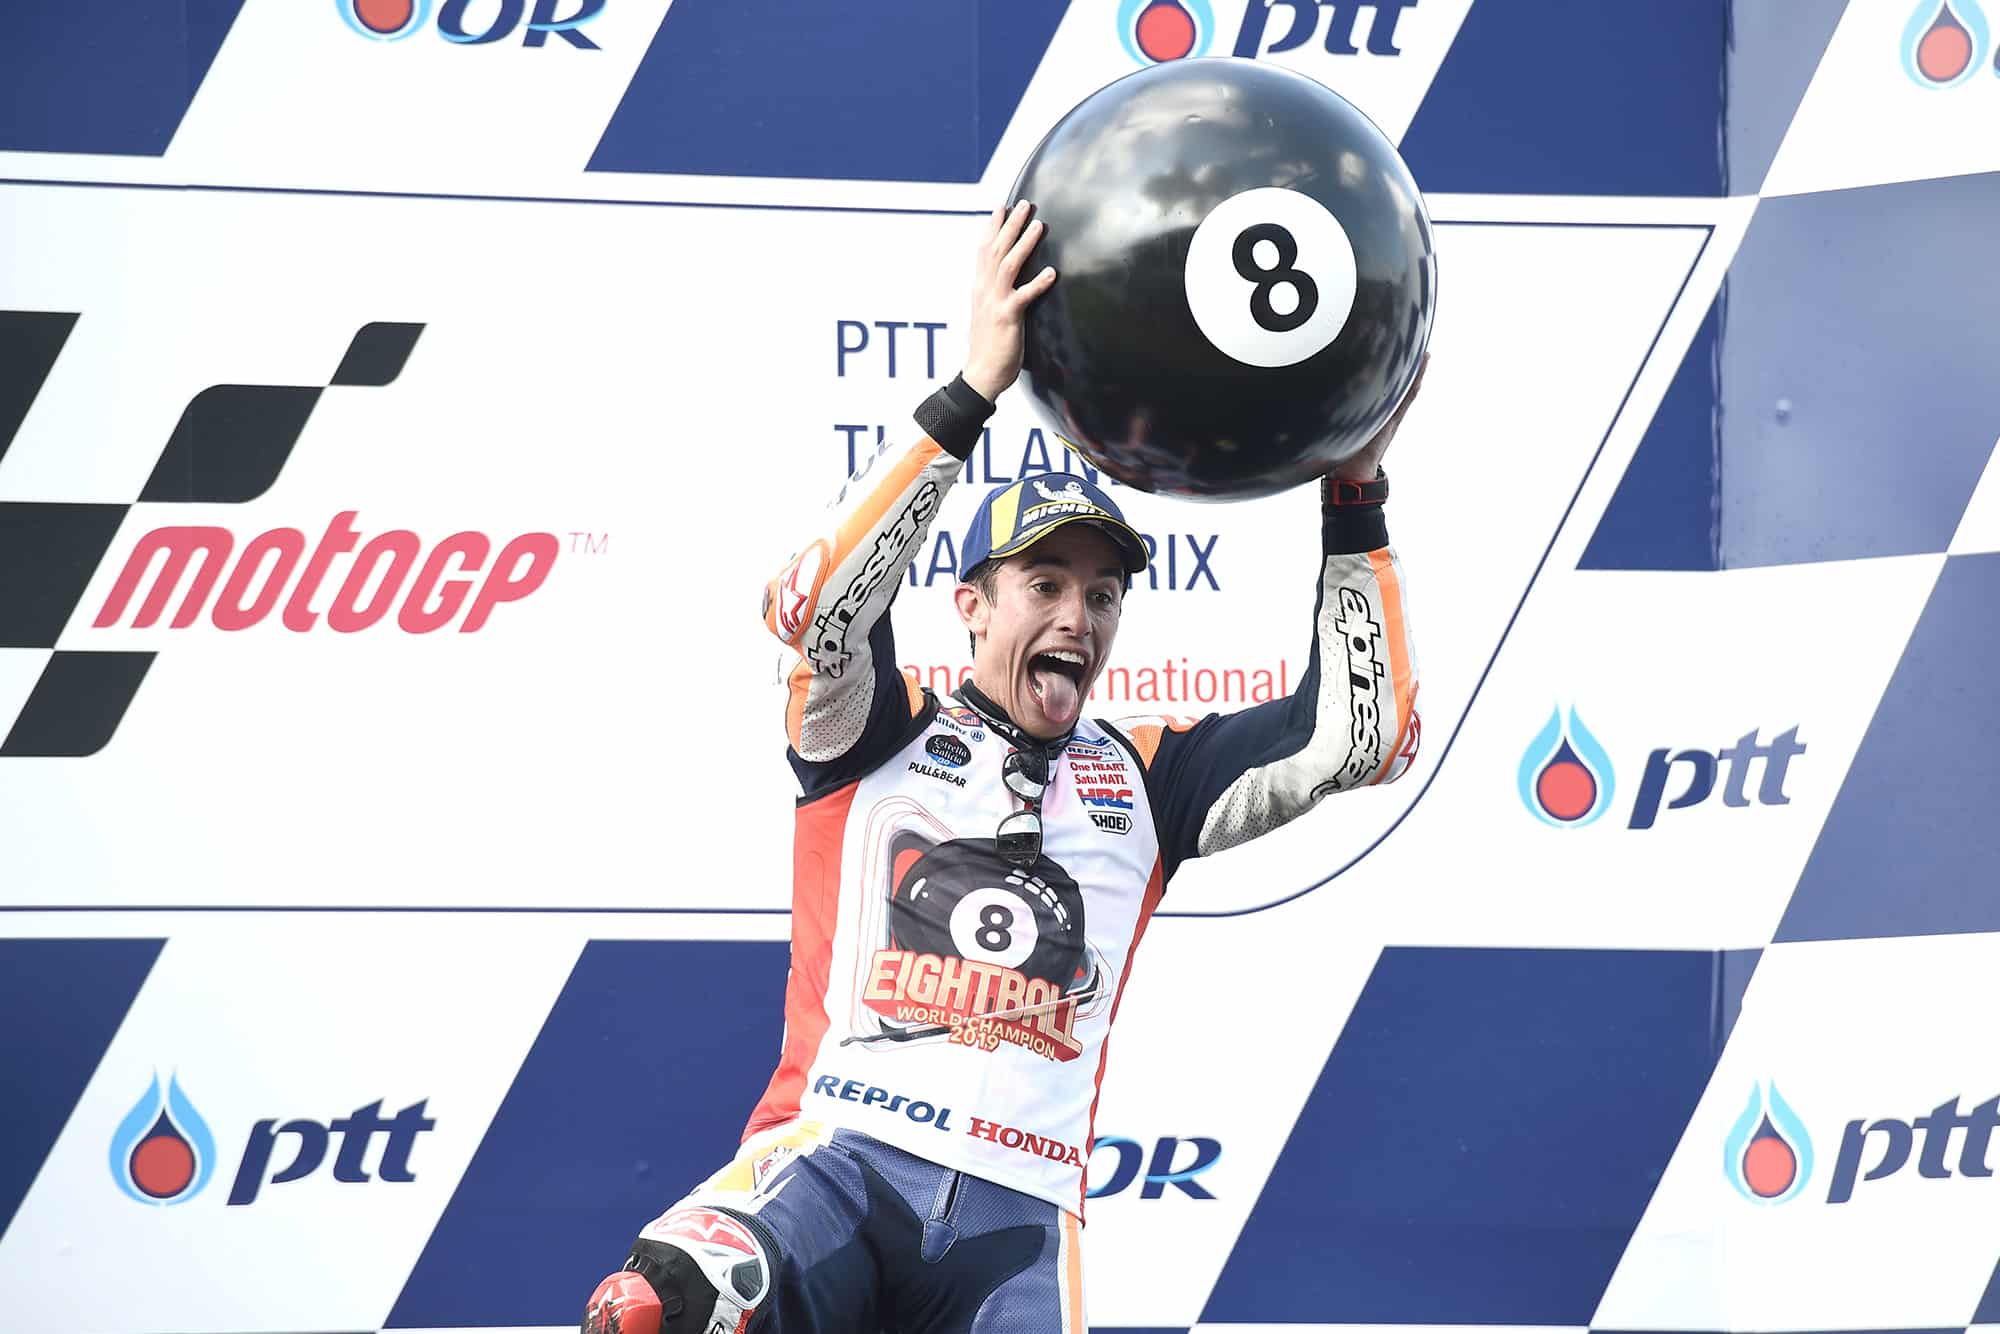 Marx Marquez on the podium with an 8 ball at the 2019 Thailand MotoGP race, after winning his sixth MotoGP title